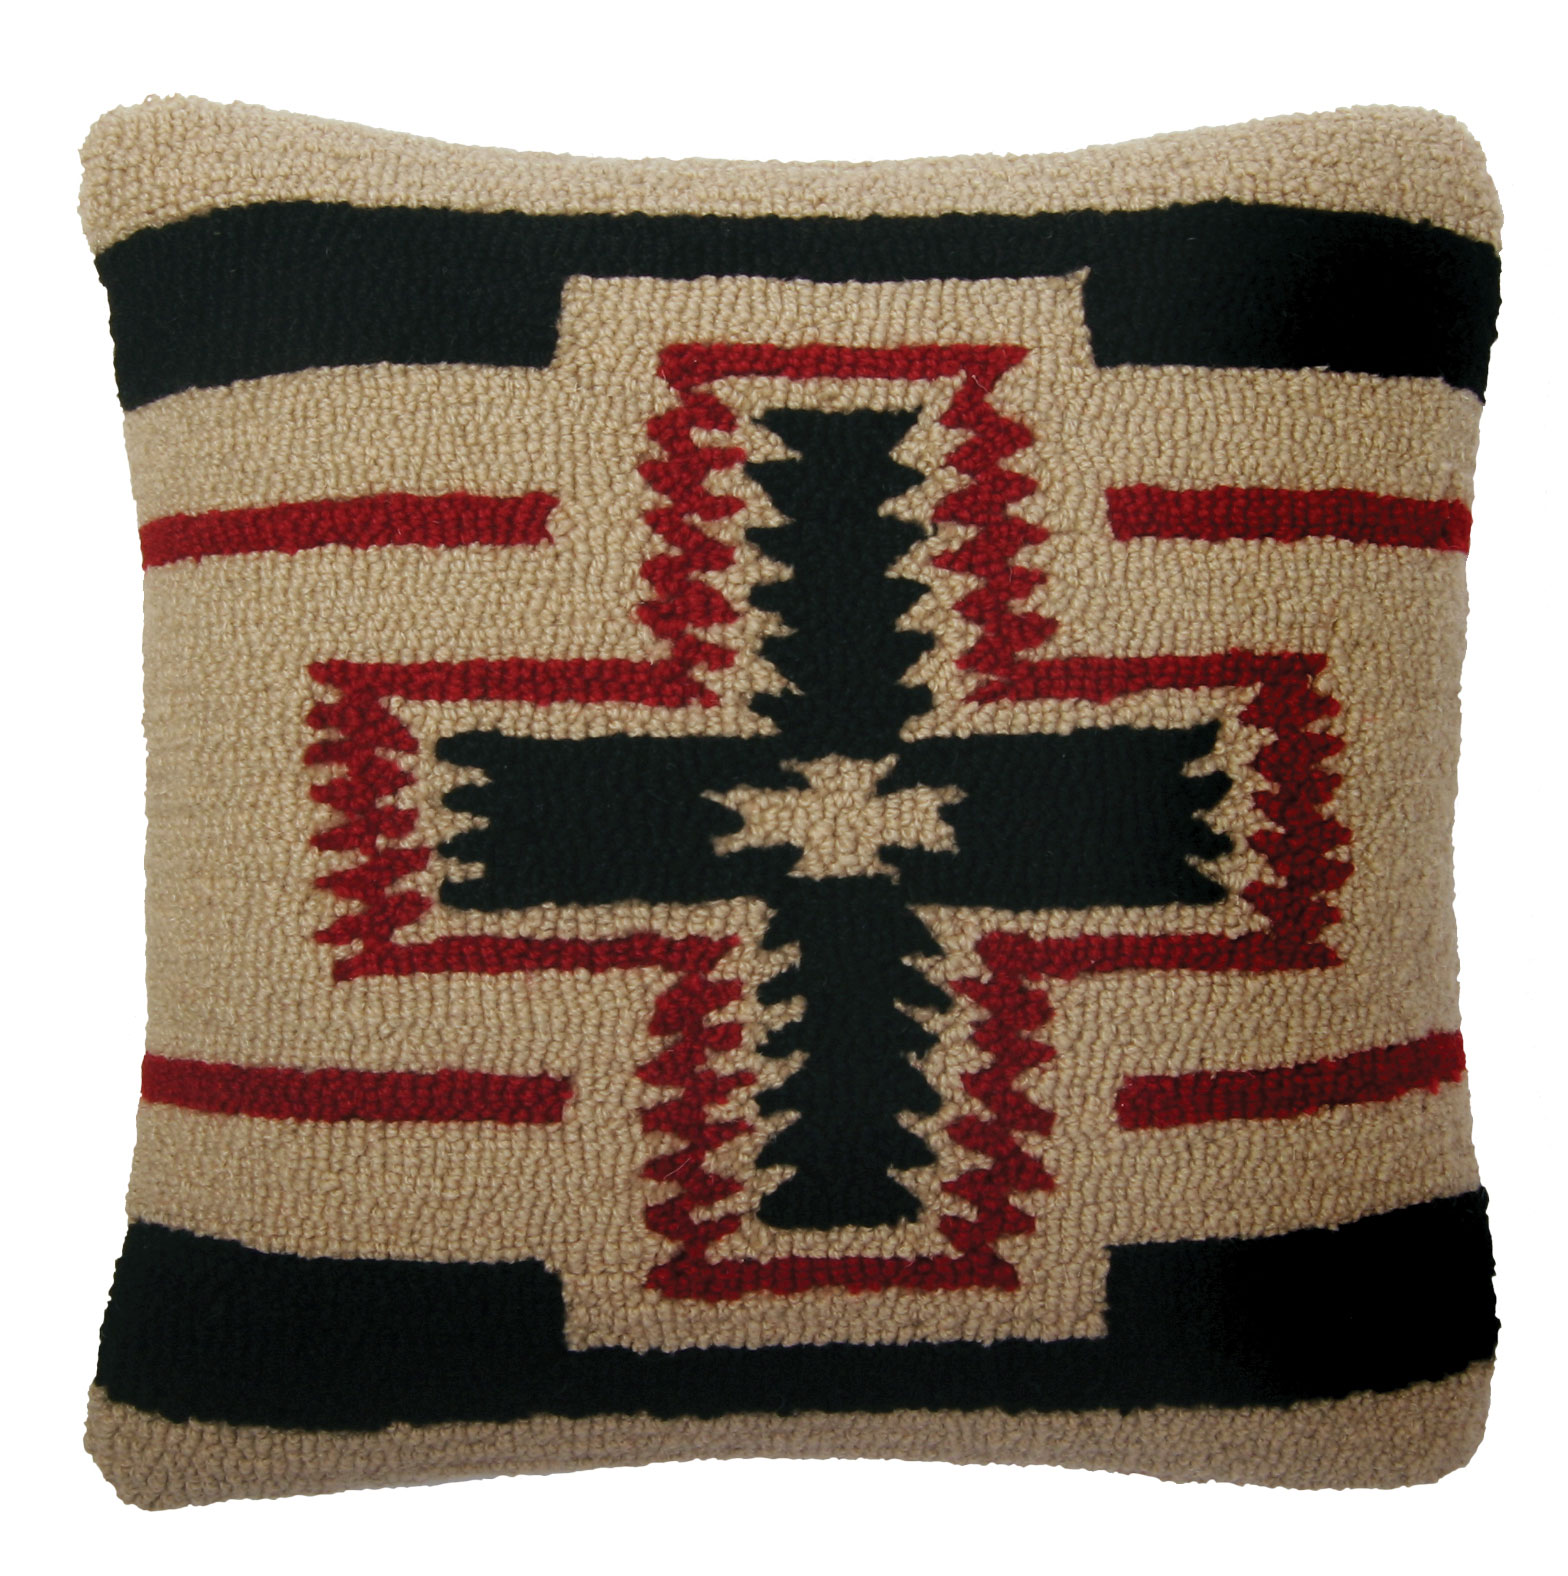 San Miguel Hooked Wool Pillow